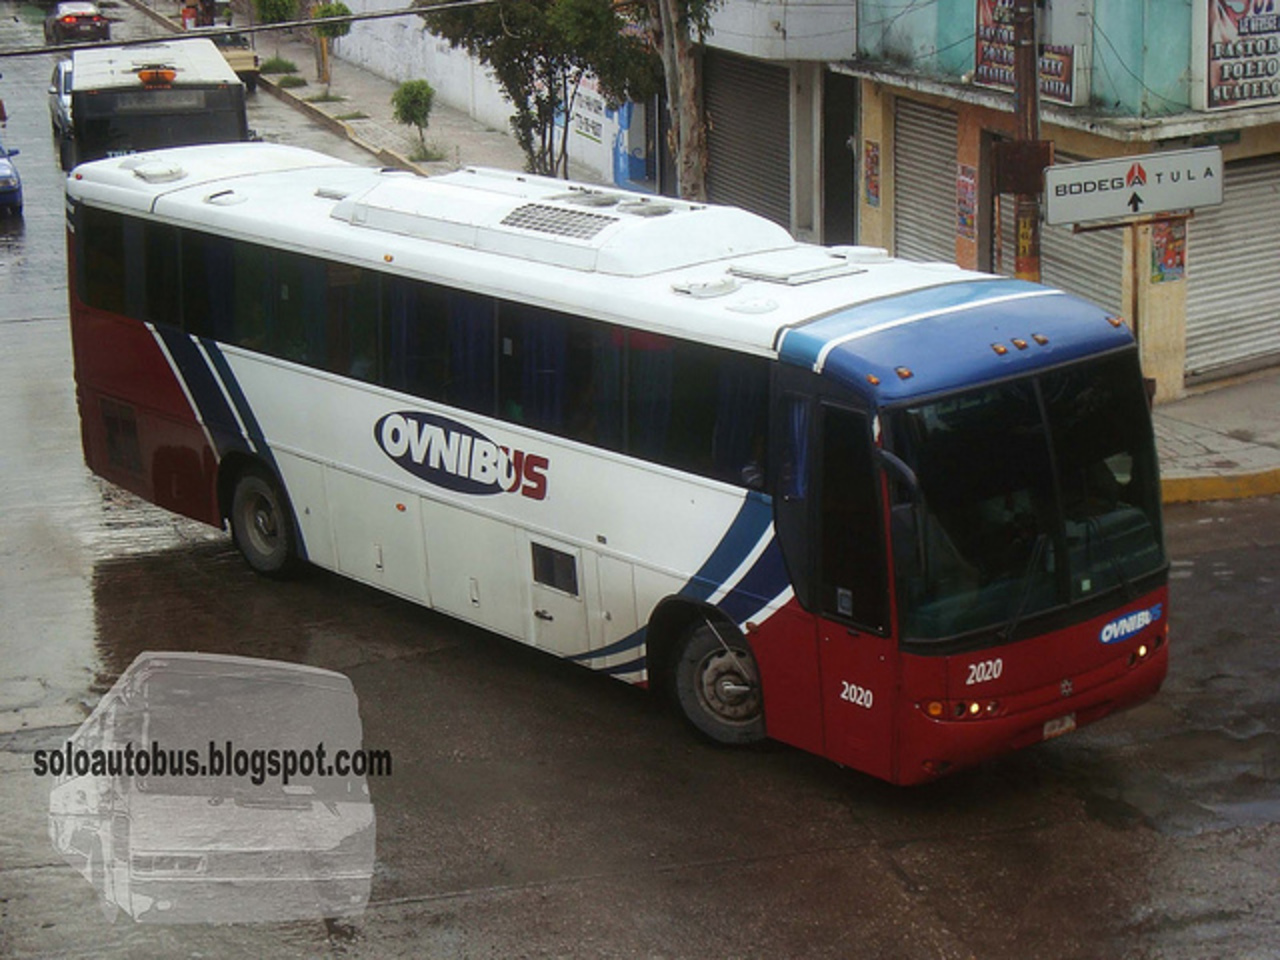 Ovnibus Marcopolo MP 100 | Flickr - Photo Sharing!